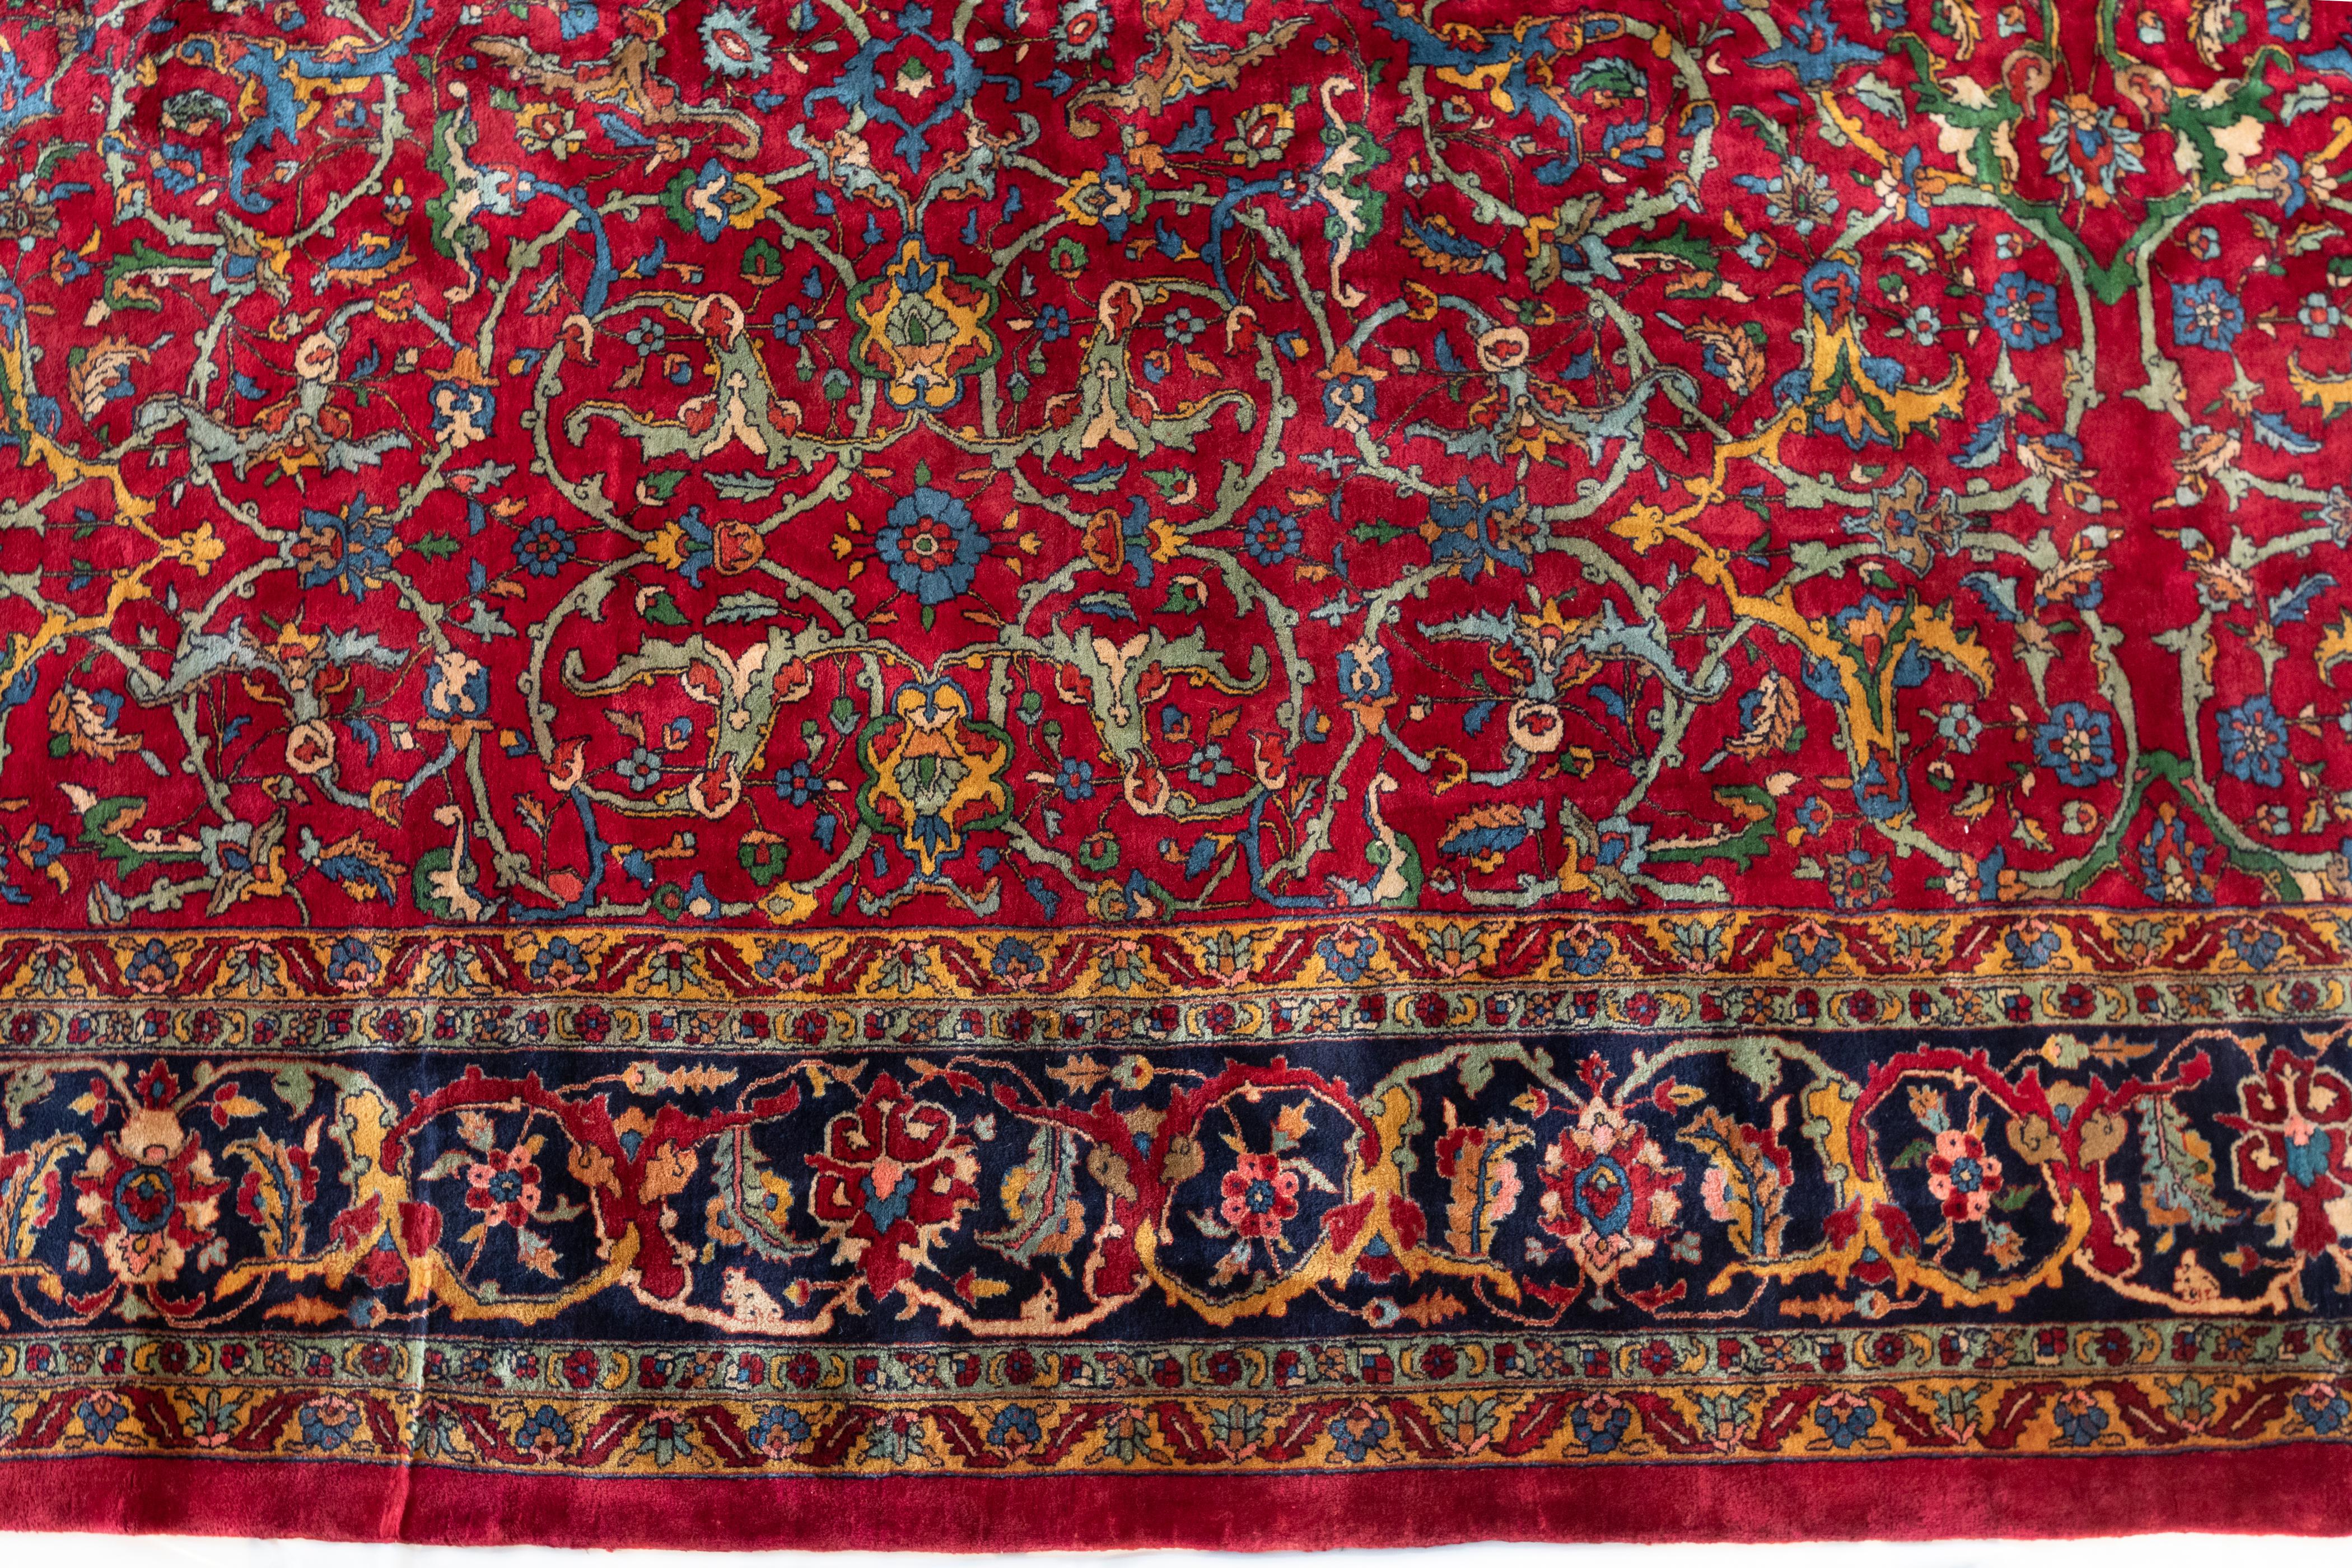 Mohajeran Persian carpets are prized for their clarity of design. They characteristically use allover patterns with a subtle central axis, and consist of a series of finely drawn blossoms, leaf, vinery and sometimes vase forms. Other Mohajerans are